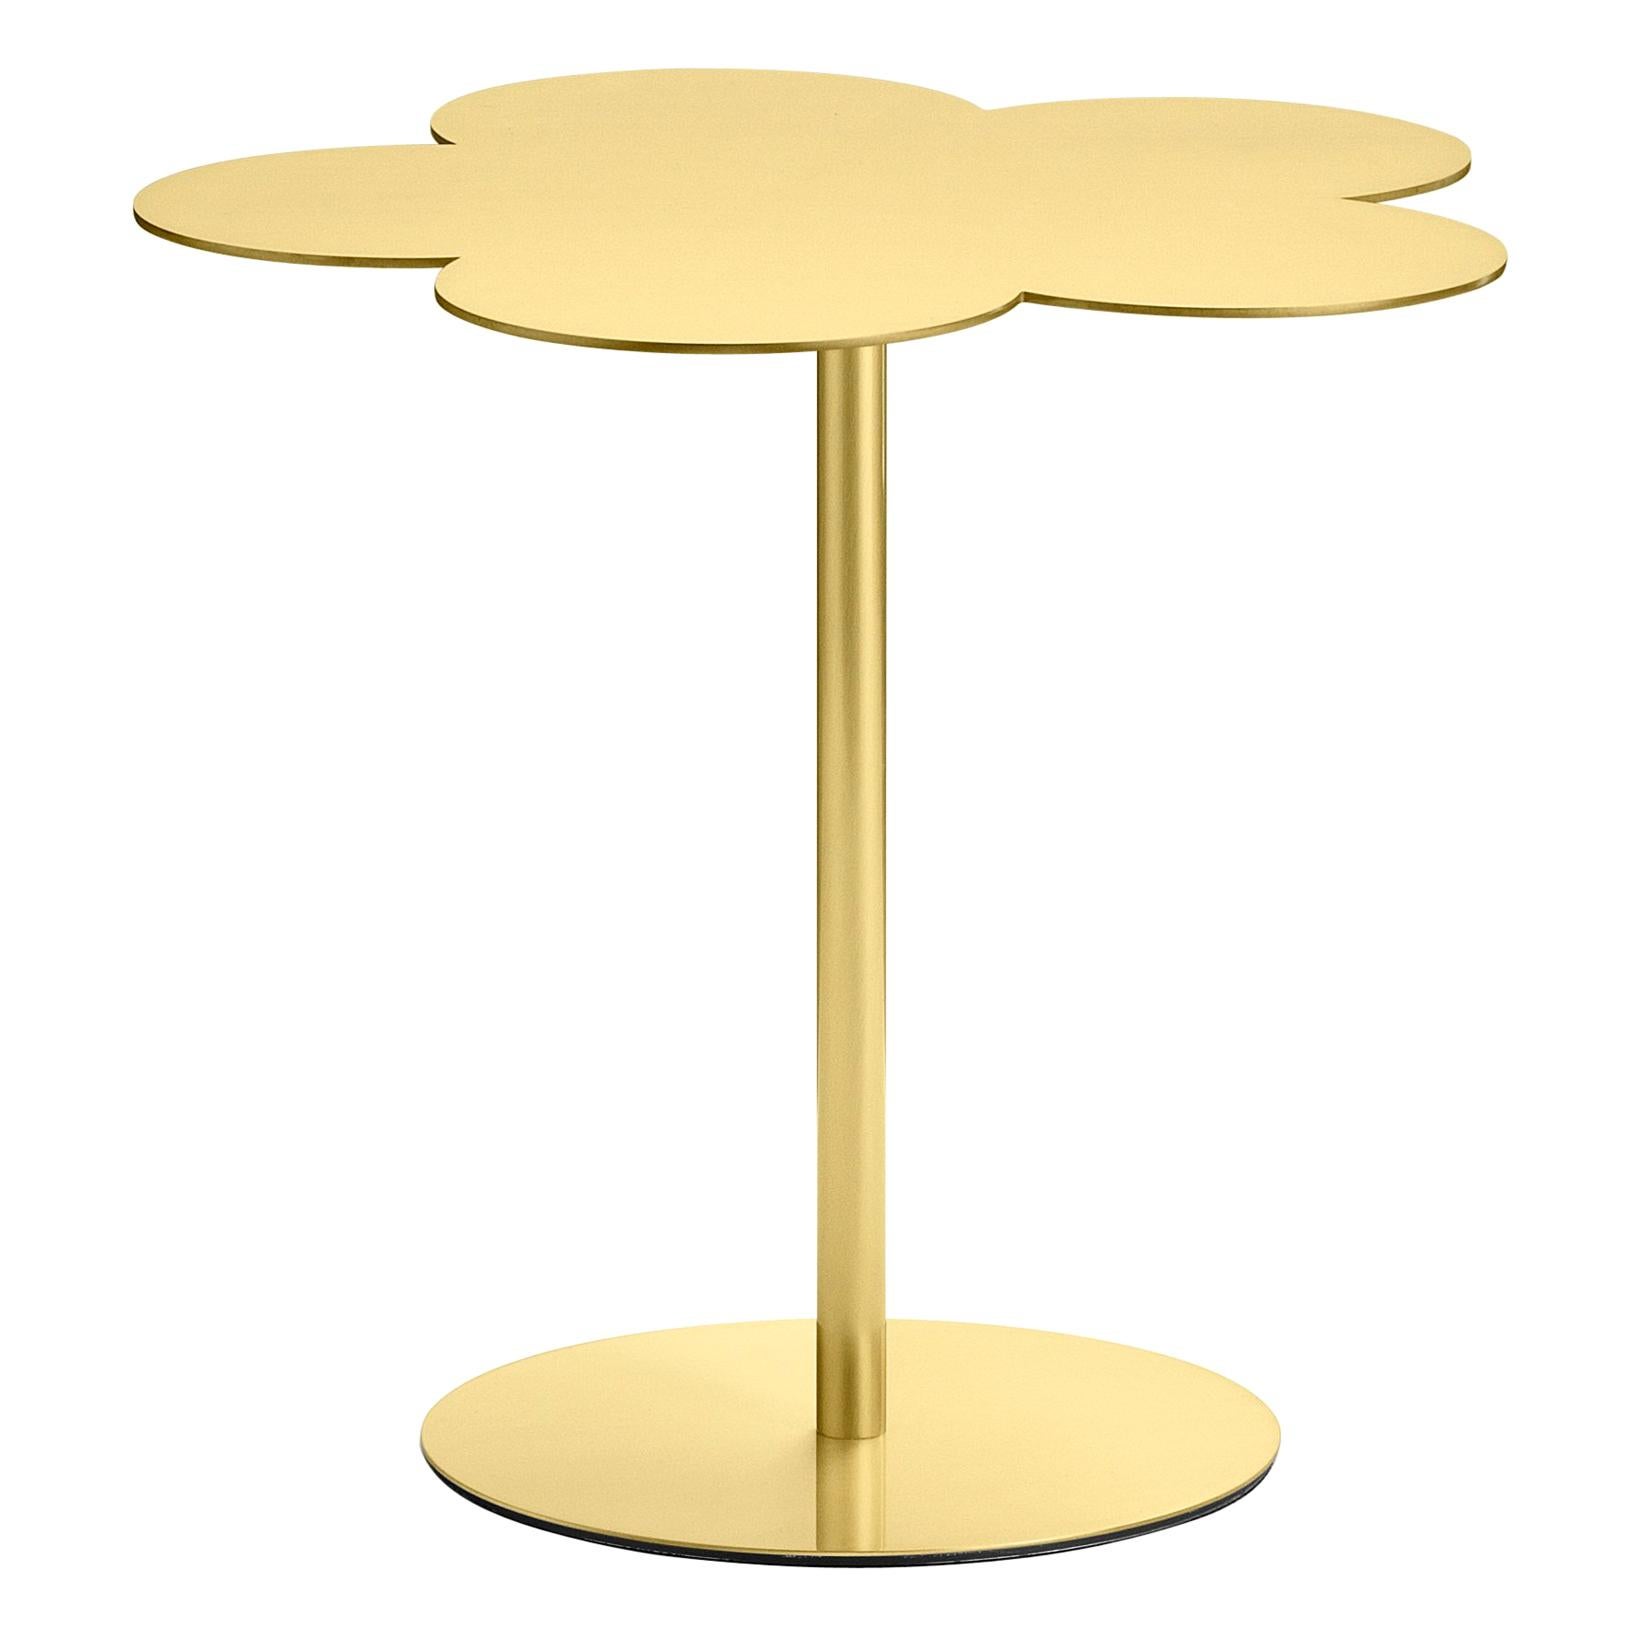 Ghidini 1961 Medium Flowers Coffee Side Table in Brass by Stefano Giovannoni For Sale